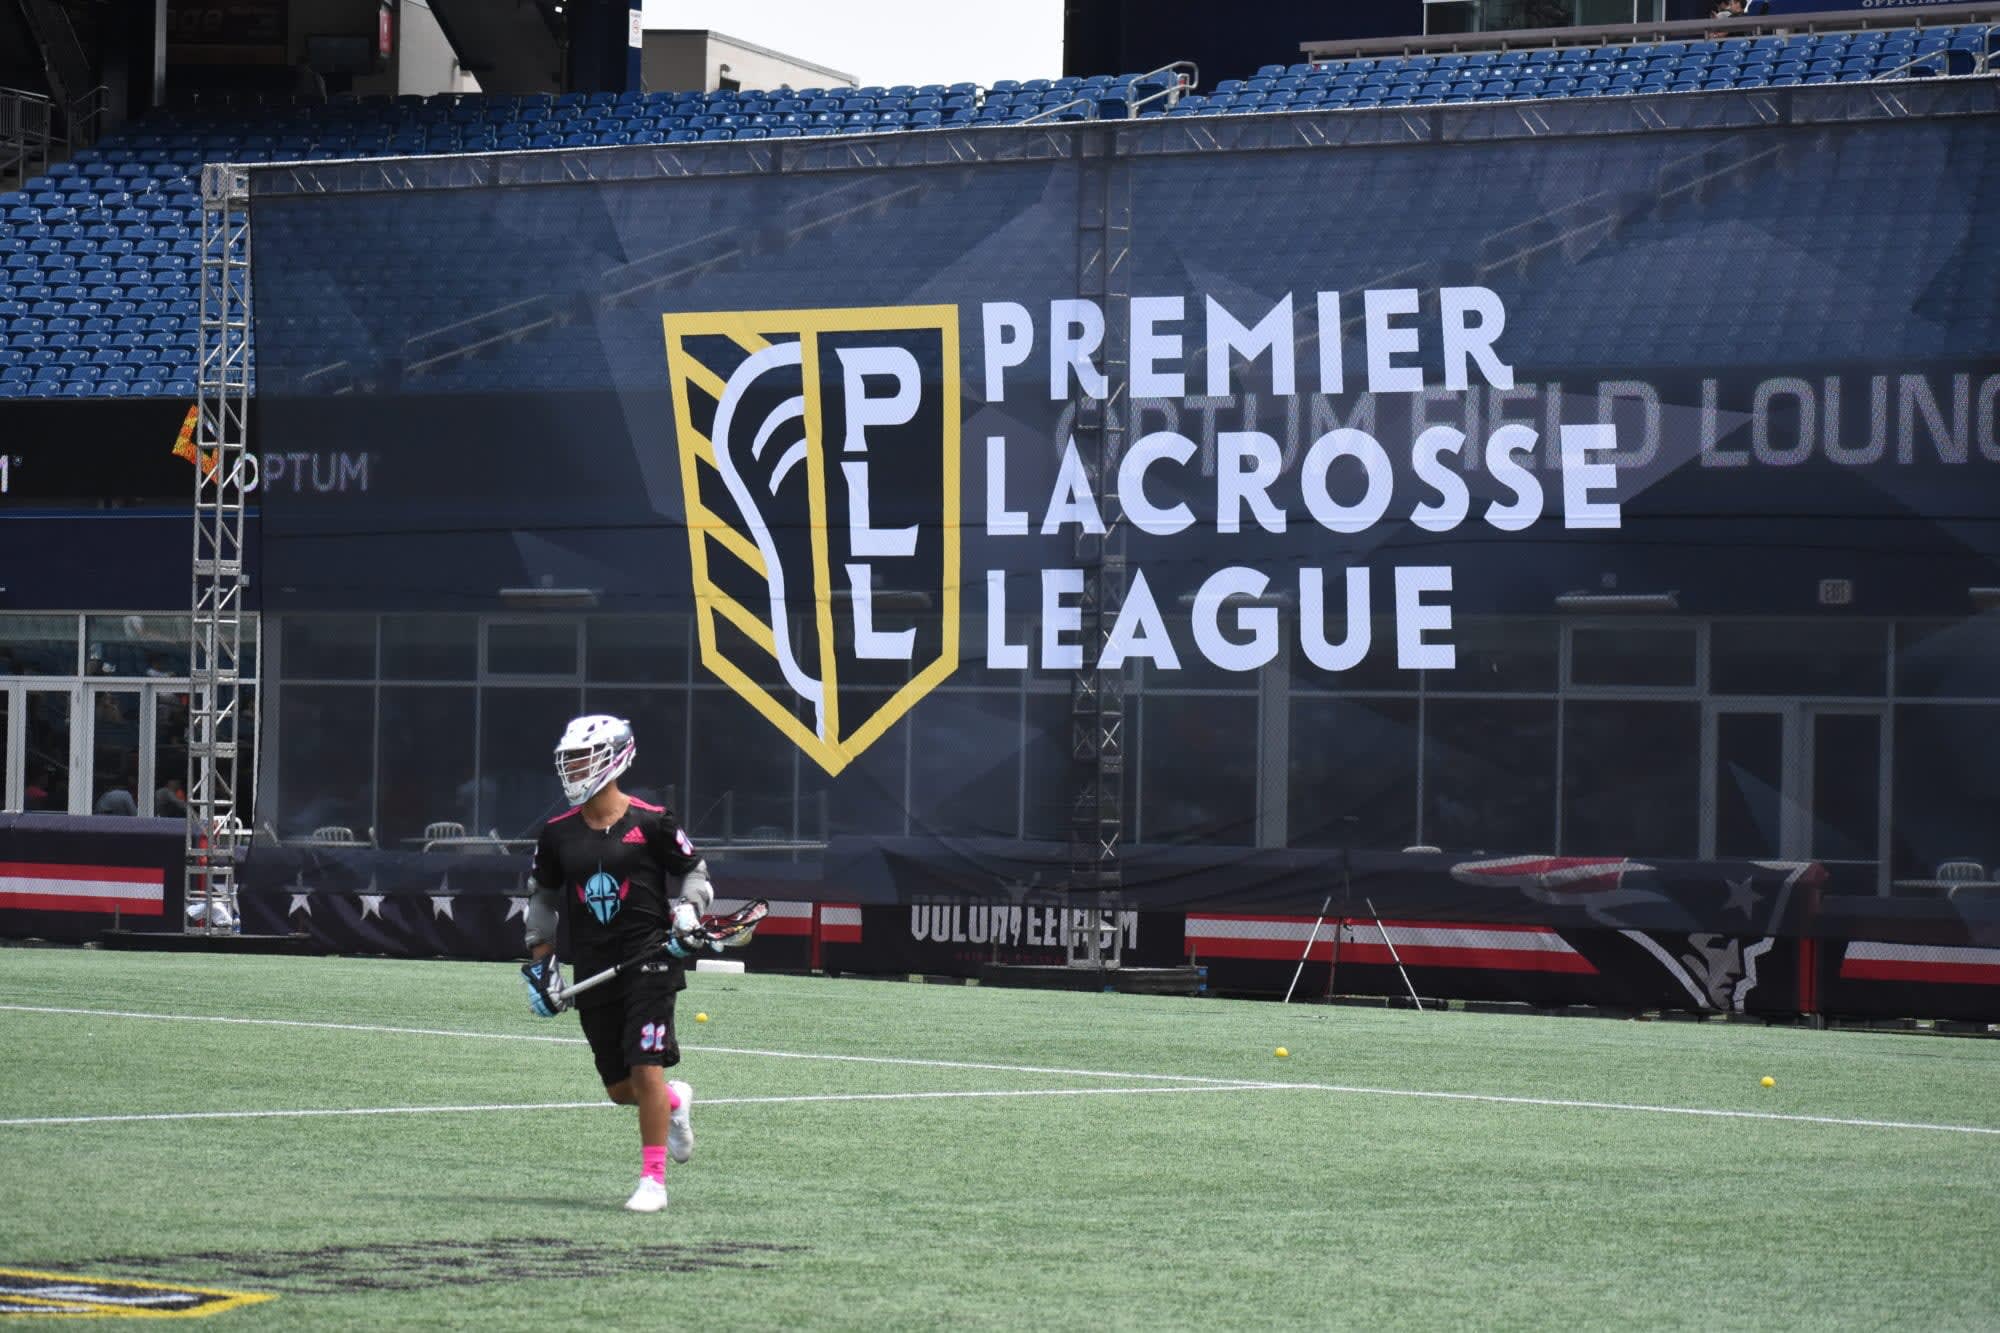 Premier Lacrosse League Team Preview: Whipsnakes LC